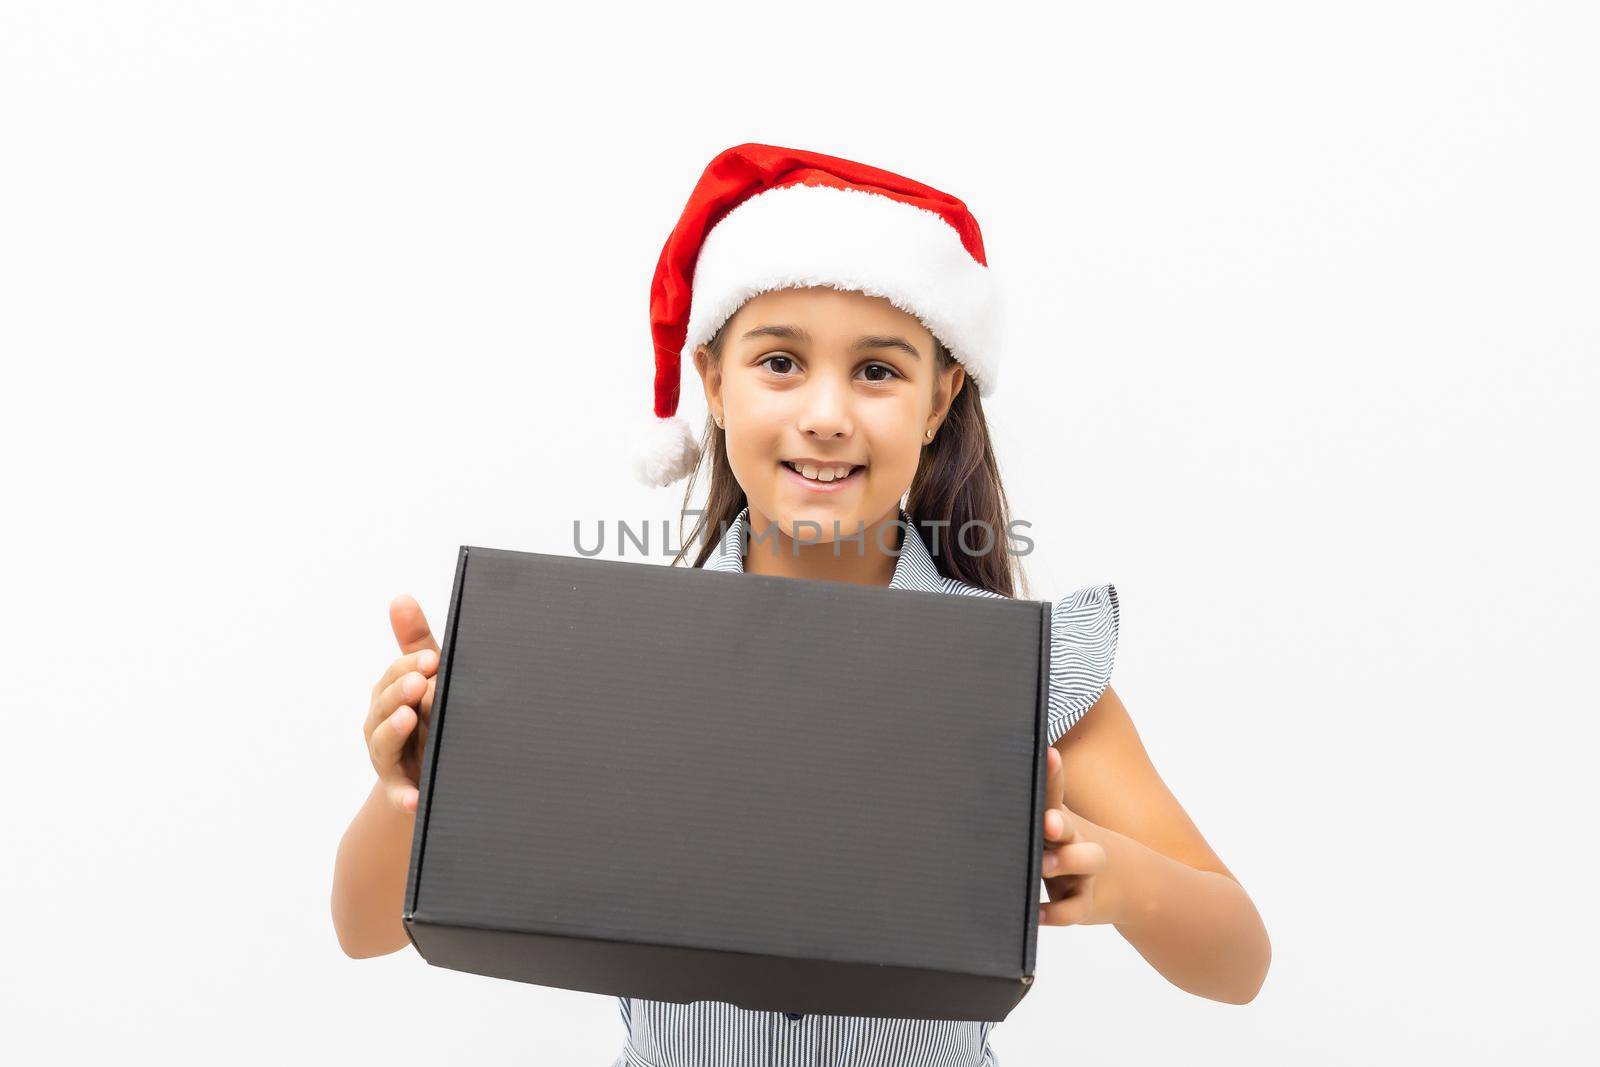 Happy girl holding gift box on white wall background.